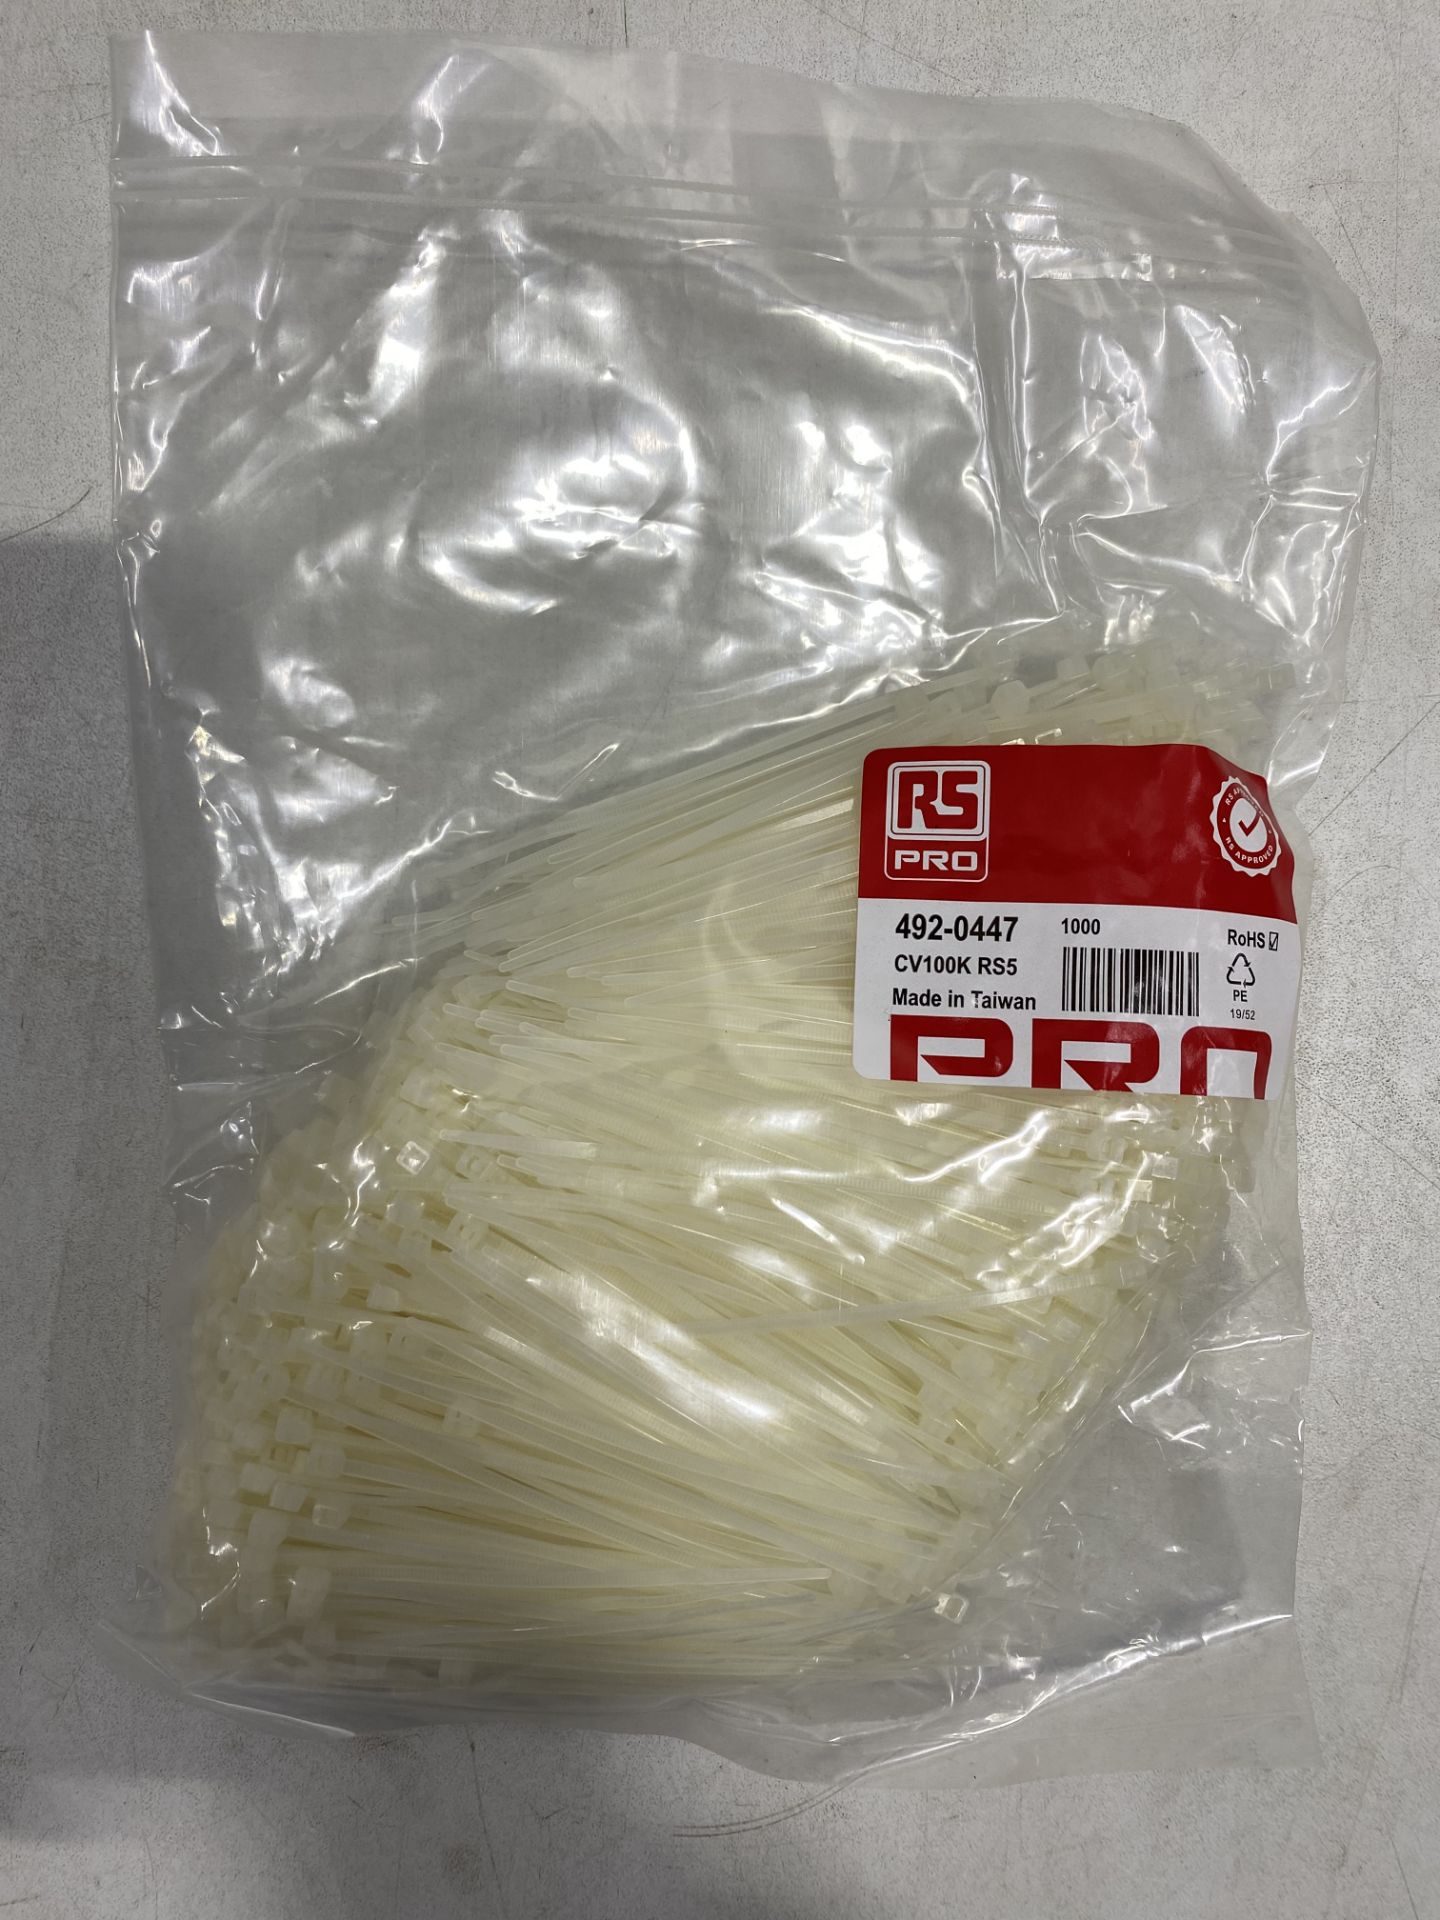 Approximately 70,000 x RS Pro 492-0447 100mm Natural Nylon Cable Ties - Image 2 of 4